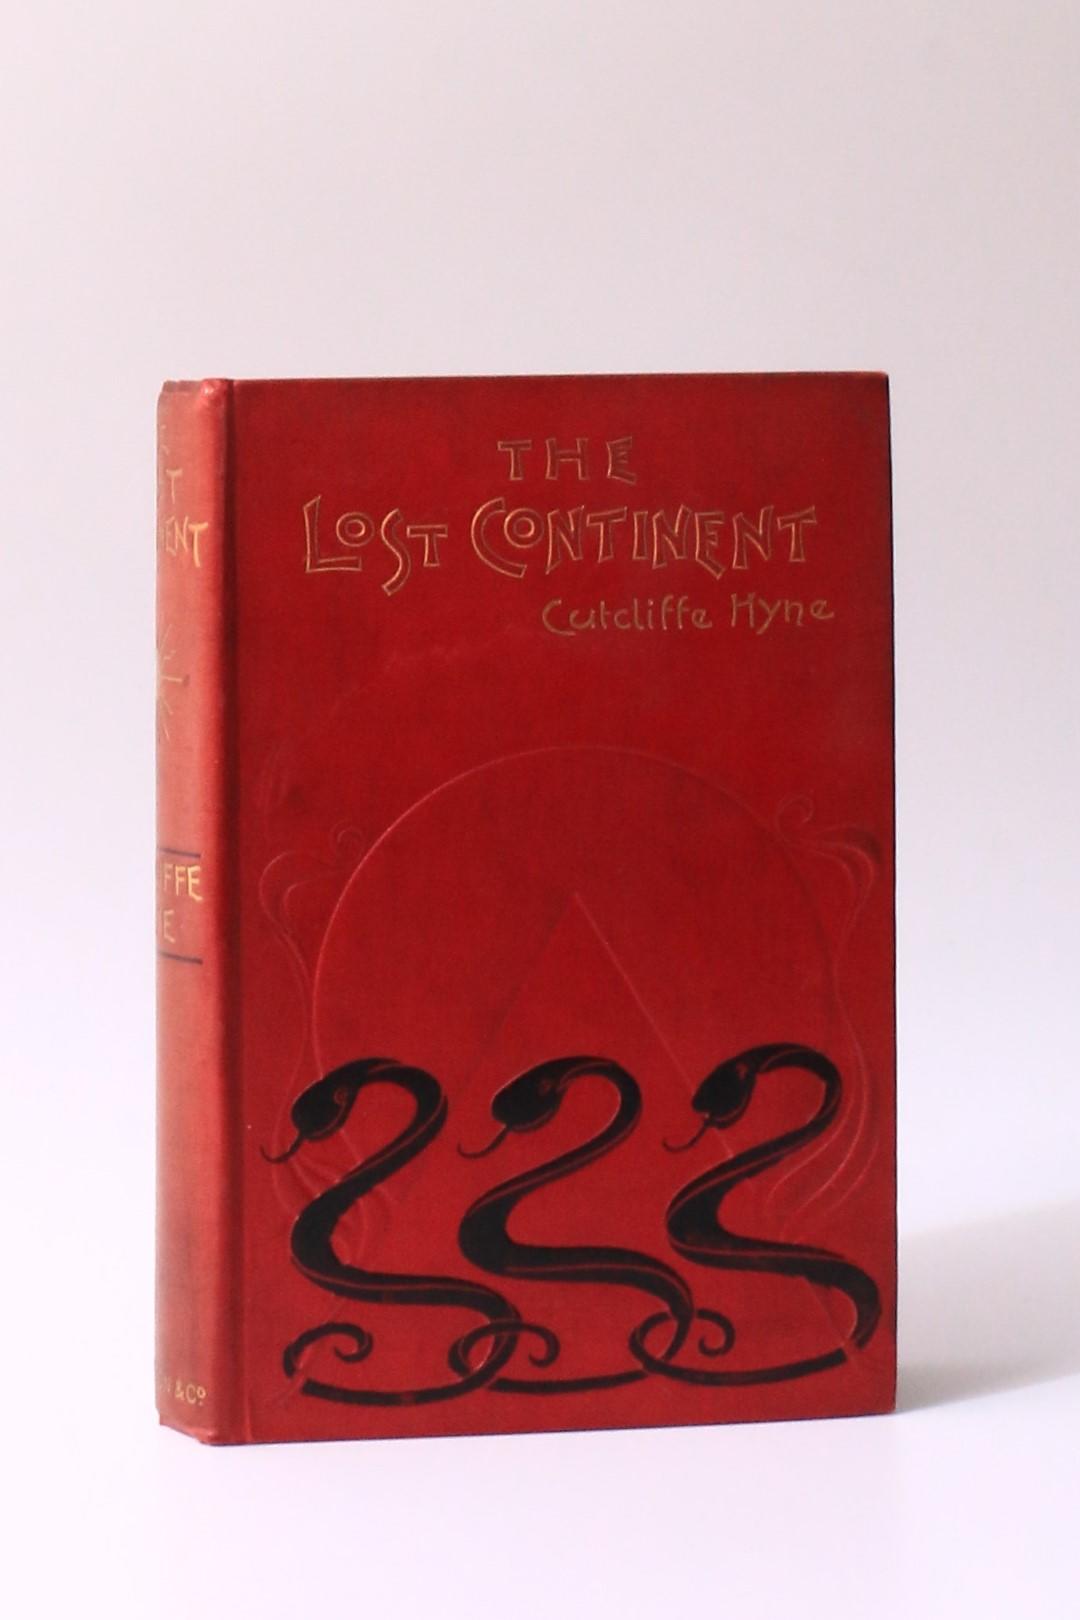 Cutcliffe Hyne - The Lost Continent: A Story of Atlantis - Hutchinson, 1900, First Edition.